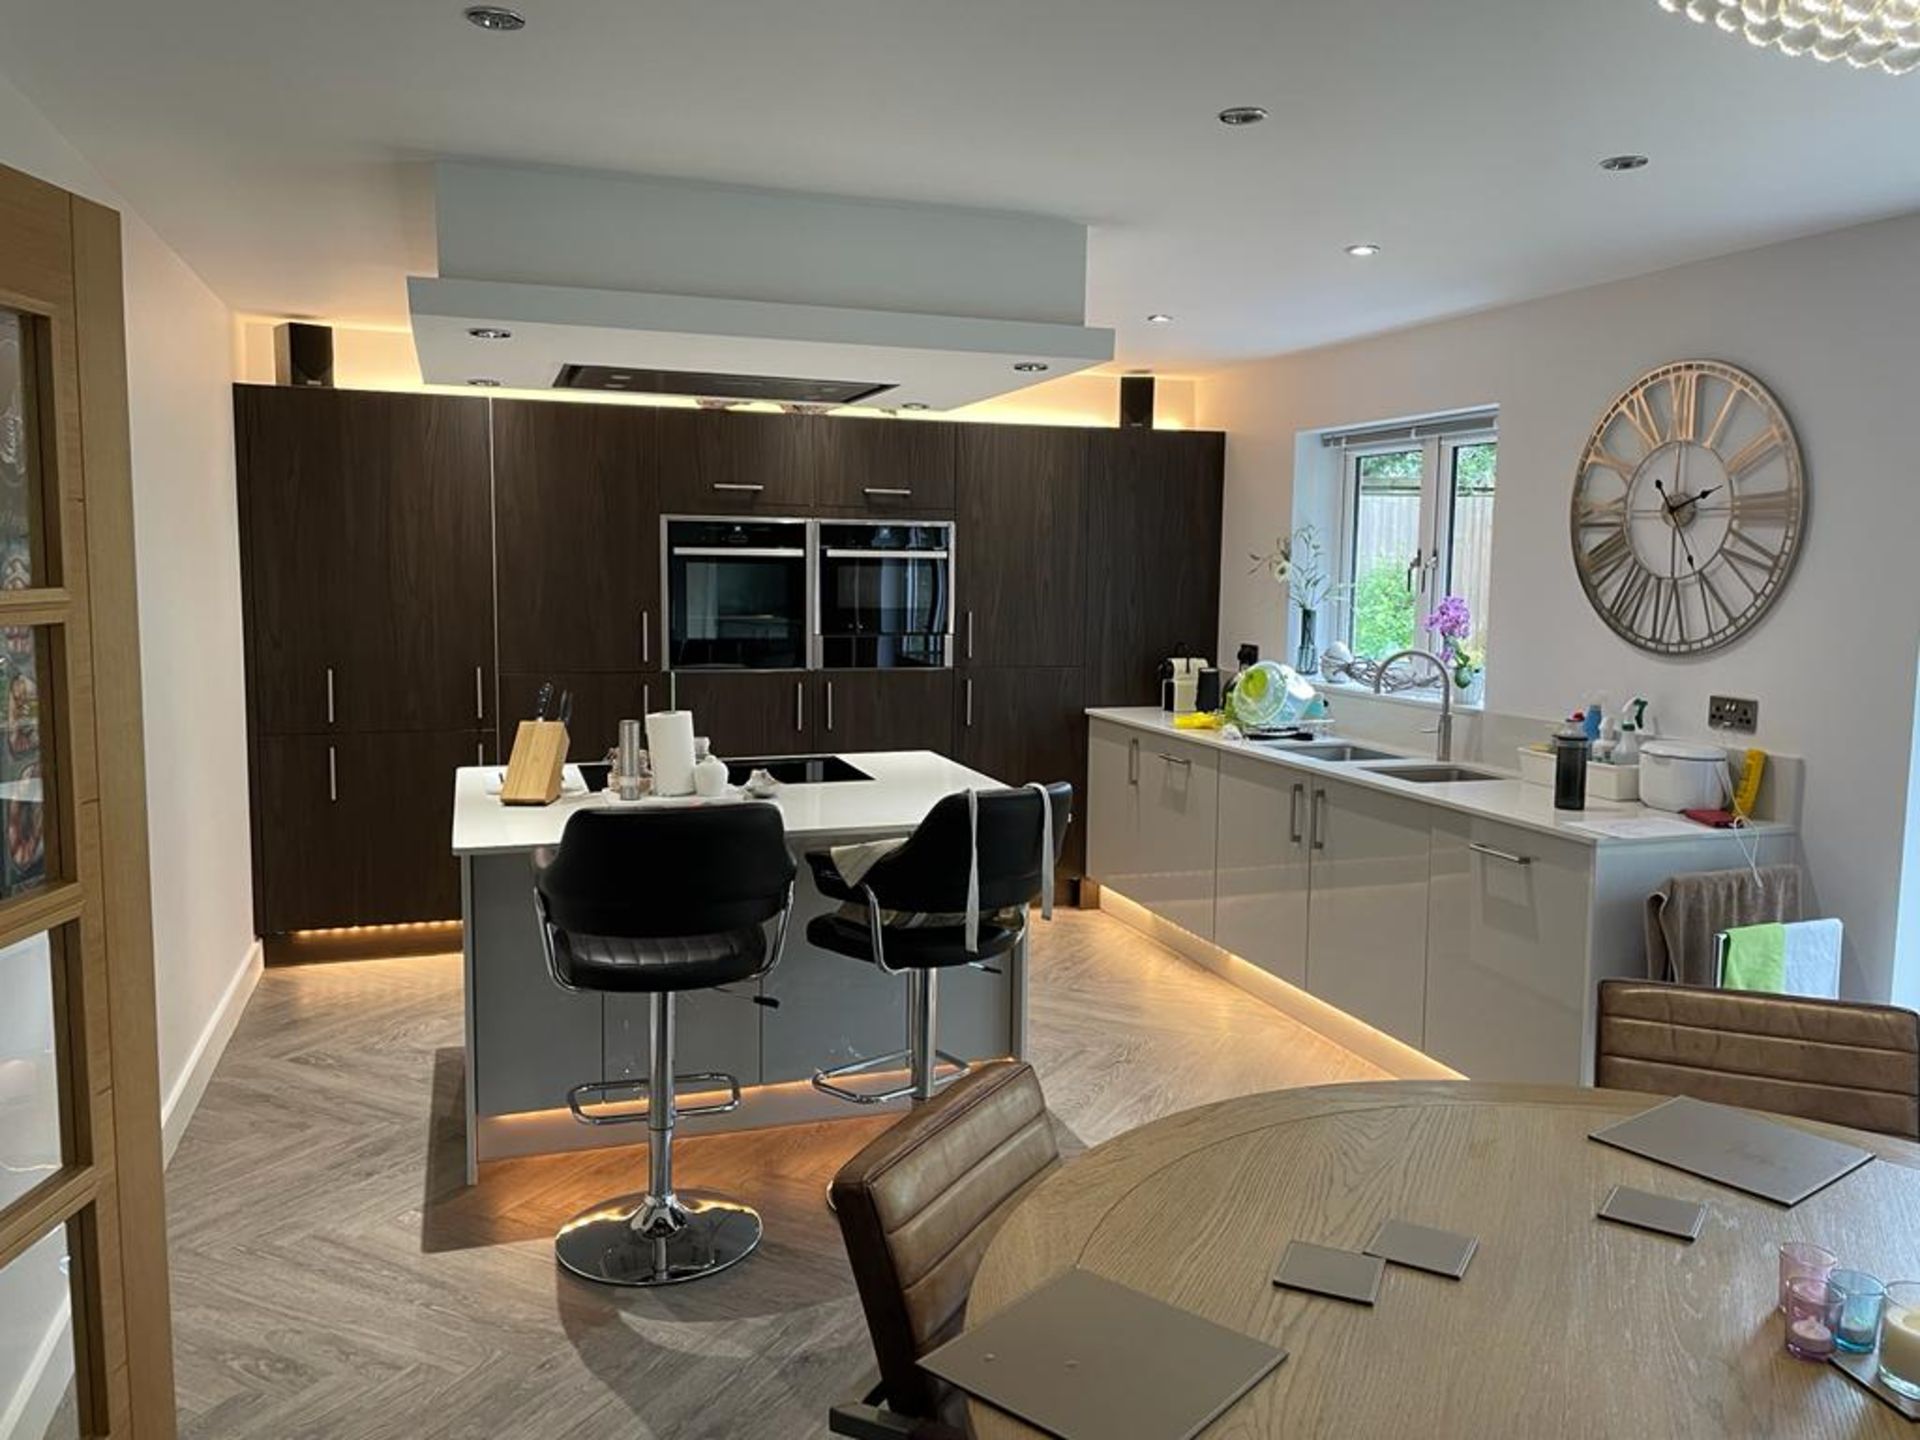 1 x SYMPHONY Contemporary Bespoke Fitted Kitchen With Integrated Bosch Appliances & Quartz Worktops - Image 8 of 18